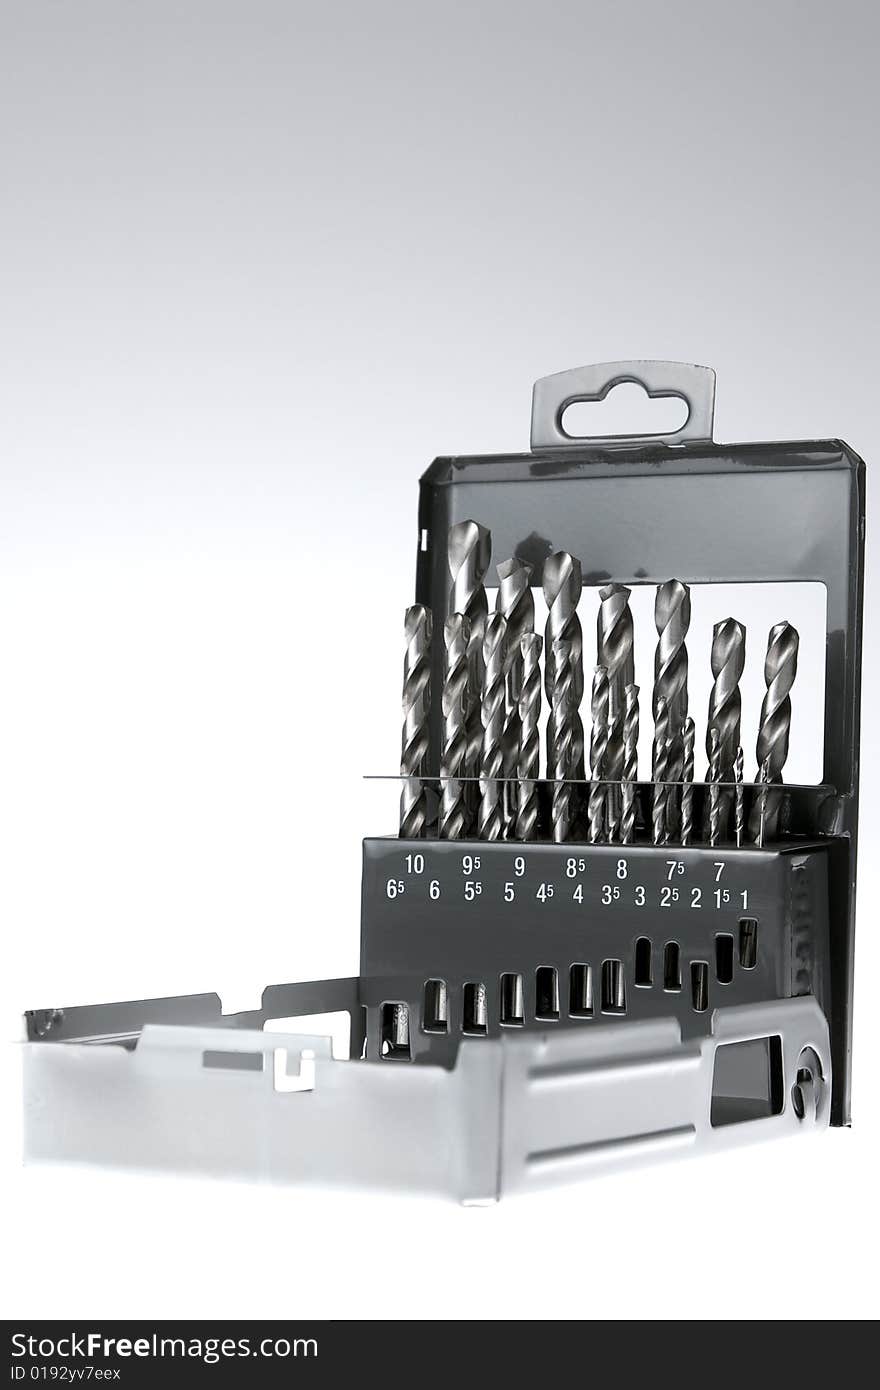 Set of drill bits over gray background